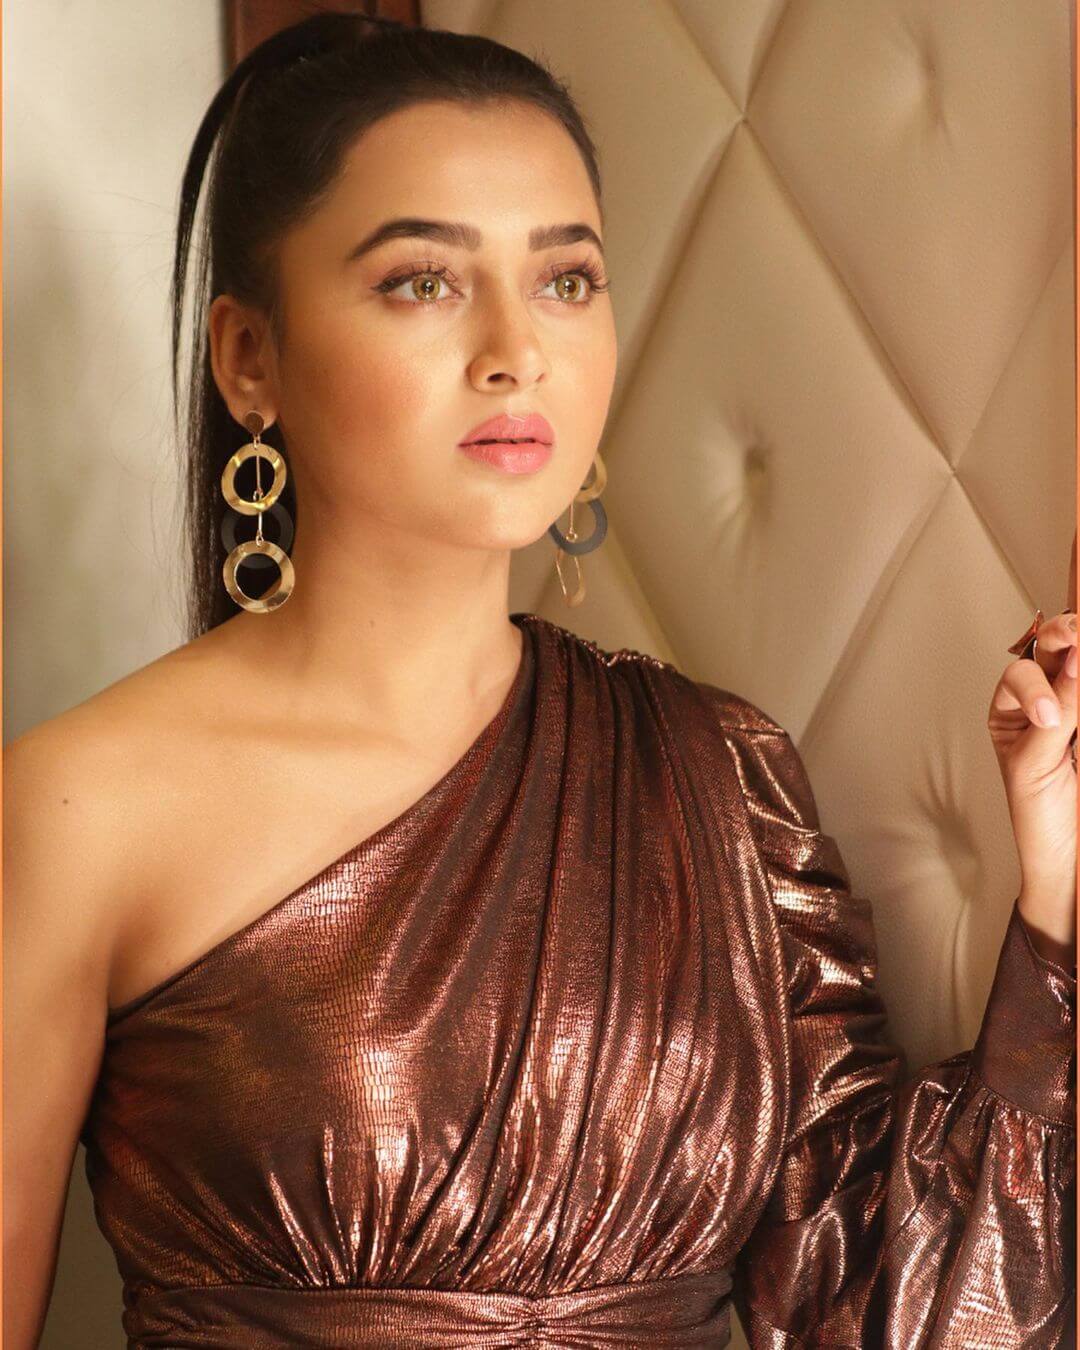 Tejasswi Prakash in glossy out fit close up shot